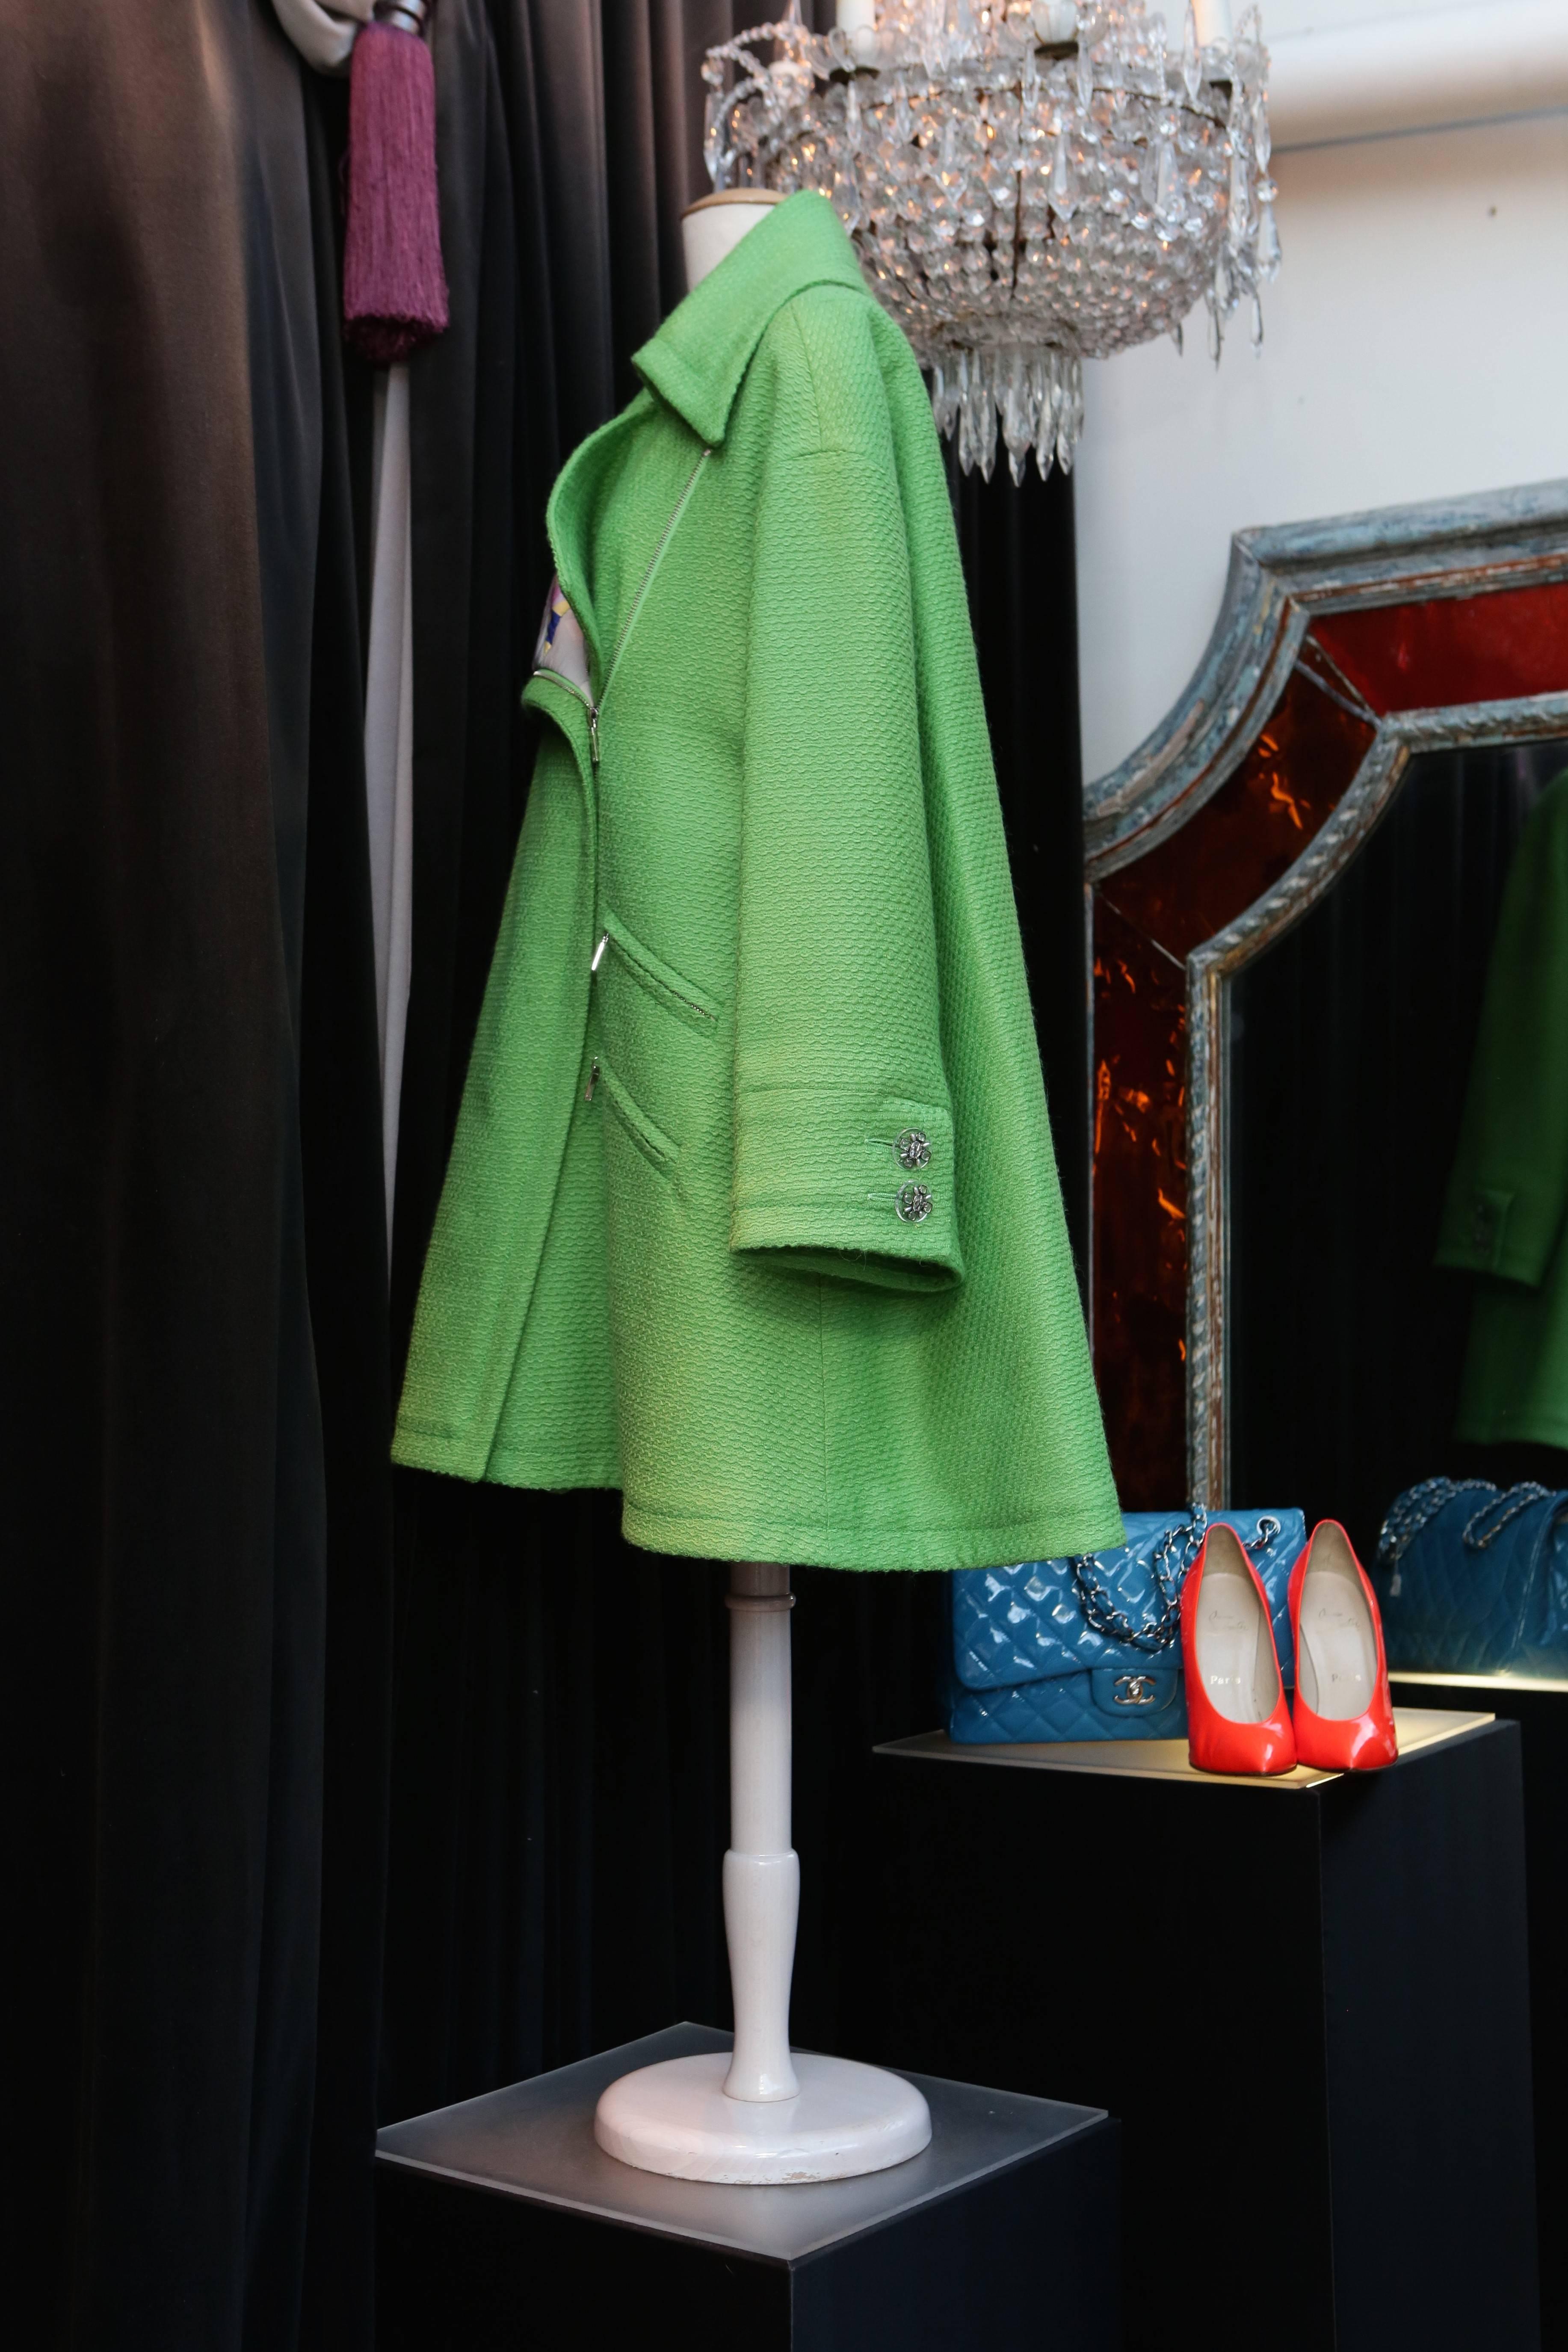 CHANEL (Made in France) Oversize apple-green wool coat withe a wide collar. Four side pockets with silver plated zip closure. The unique lining is made out of quilted silk printed with colored patterns in the style of Robert Delaunay’s works and